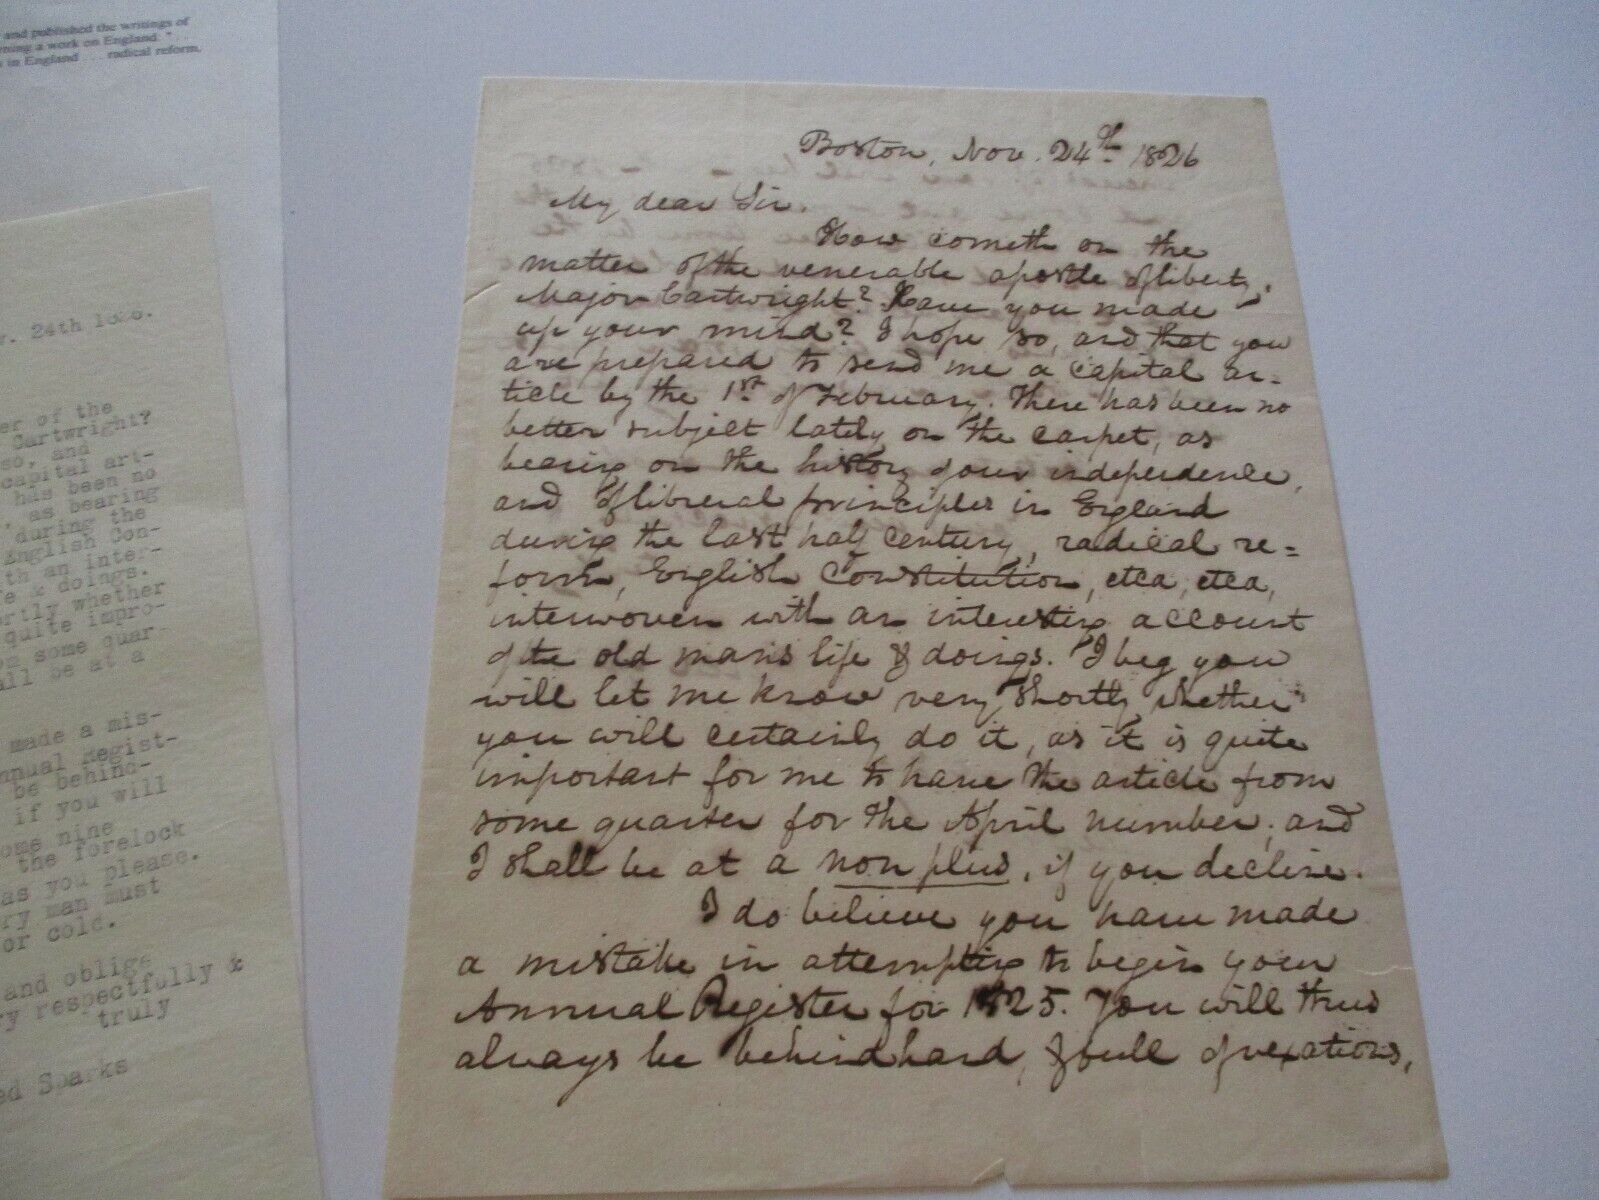 JARED SPARKS SIGNED LETTER AUTOGRAPH FAMOUS AMERICAN  HISTORIAN 19TH CENTURY 